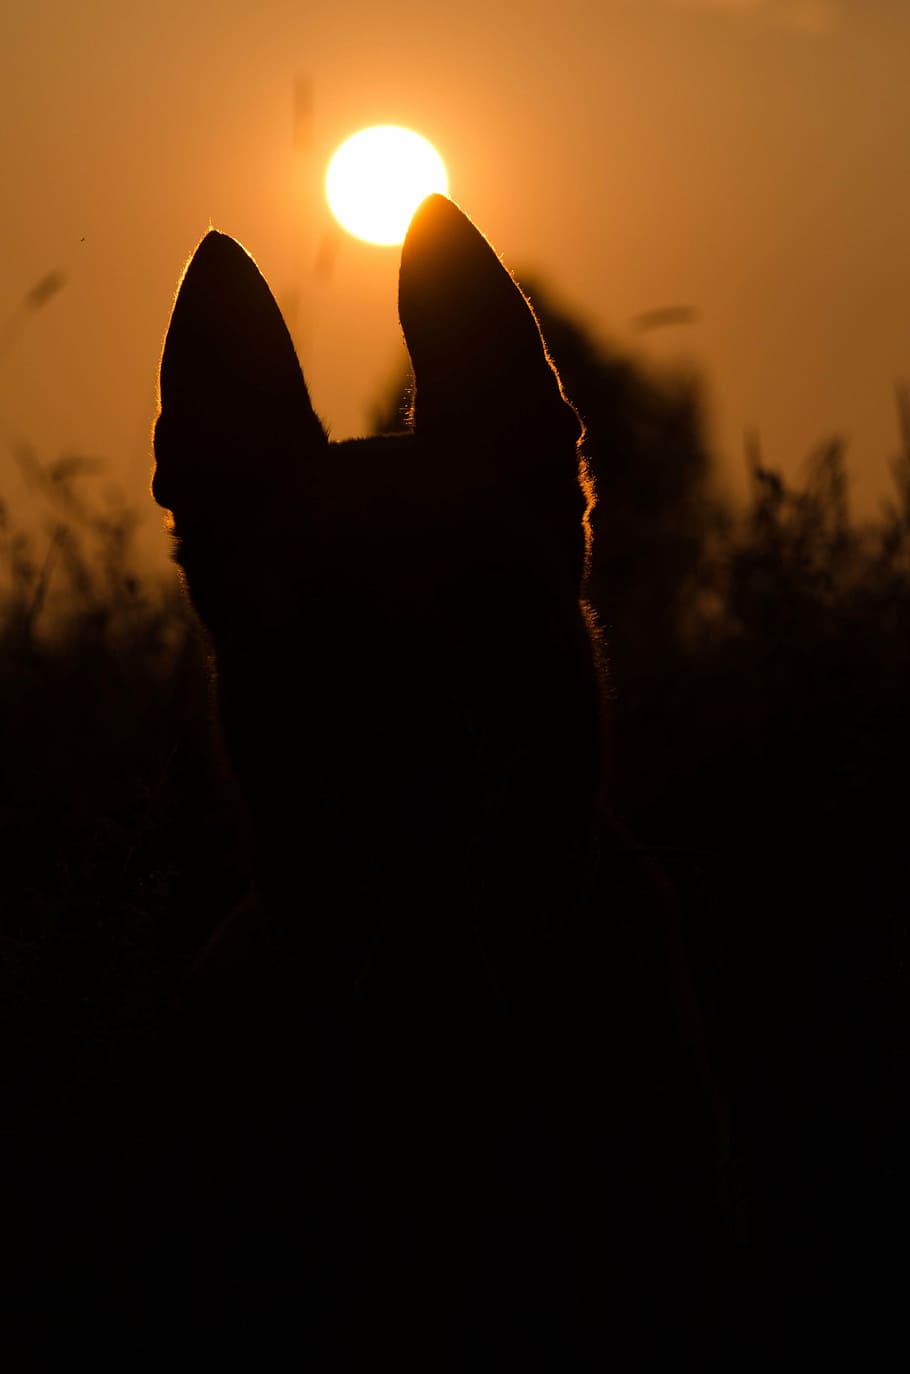 summer, sunset, dog, malinois, silhouette, sky, orange color, one person, human body part, sun